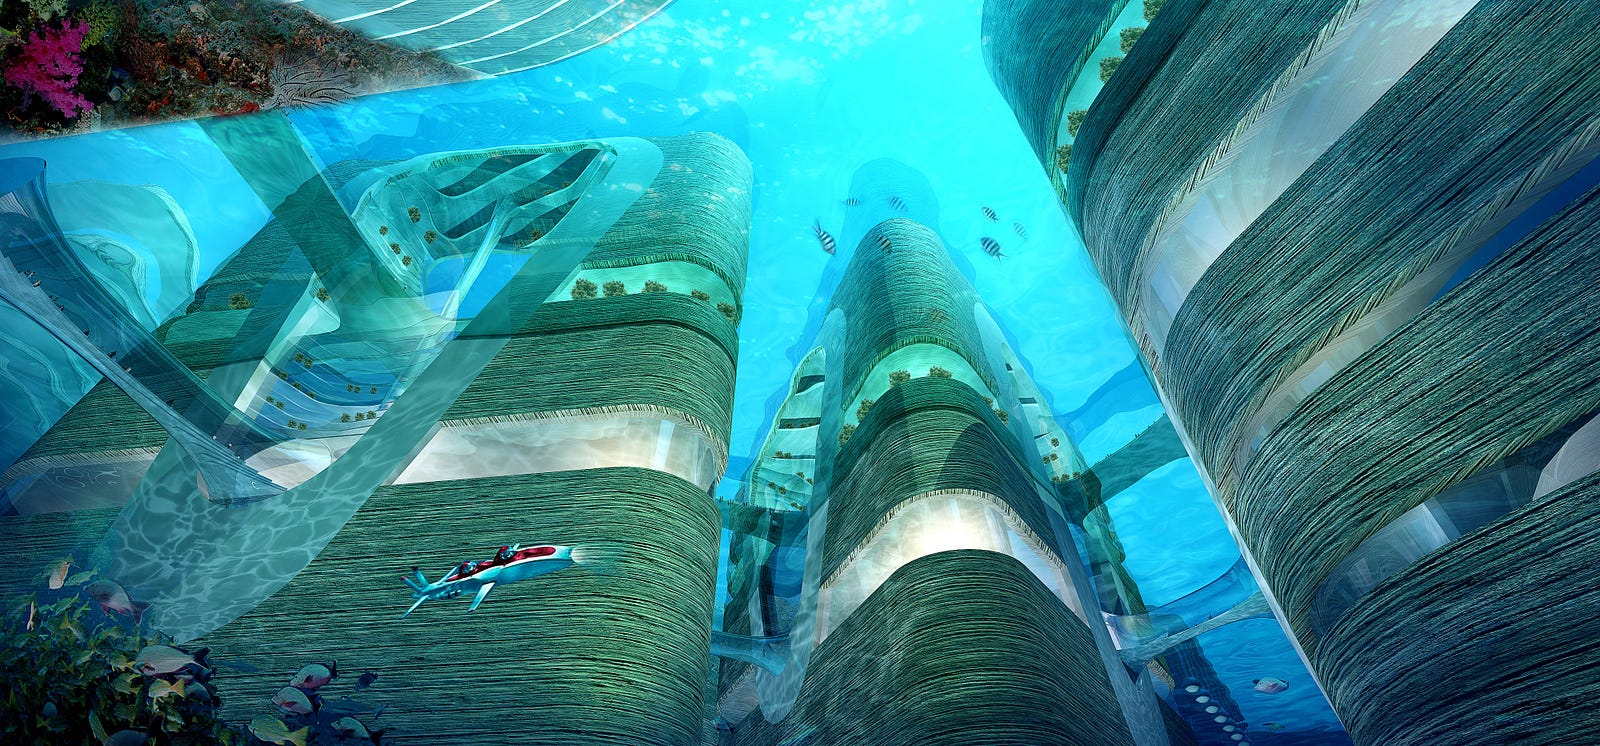 What Will the Underwater City of the Future Look Like?